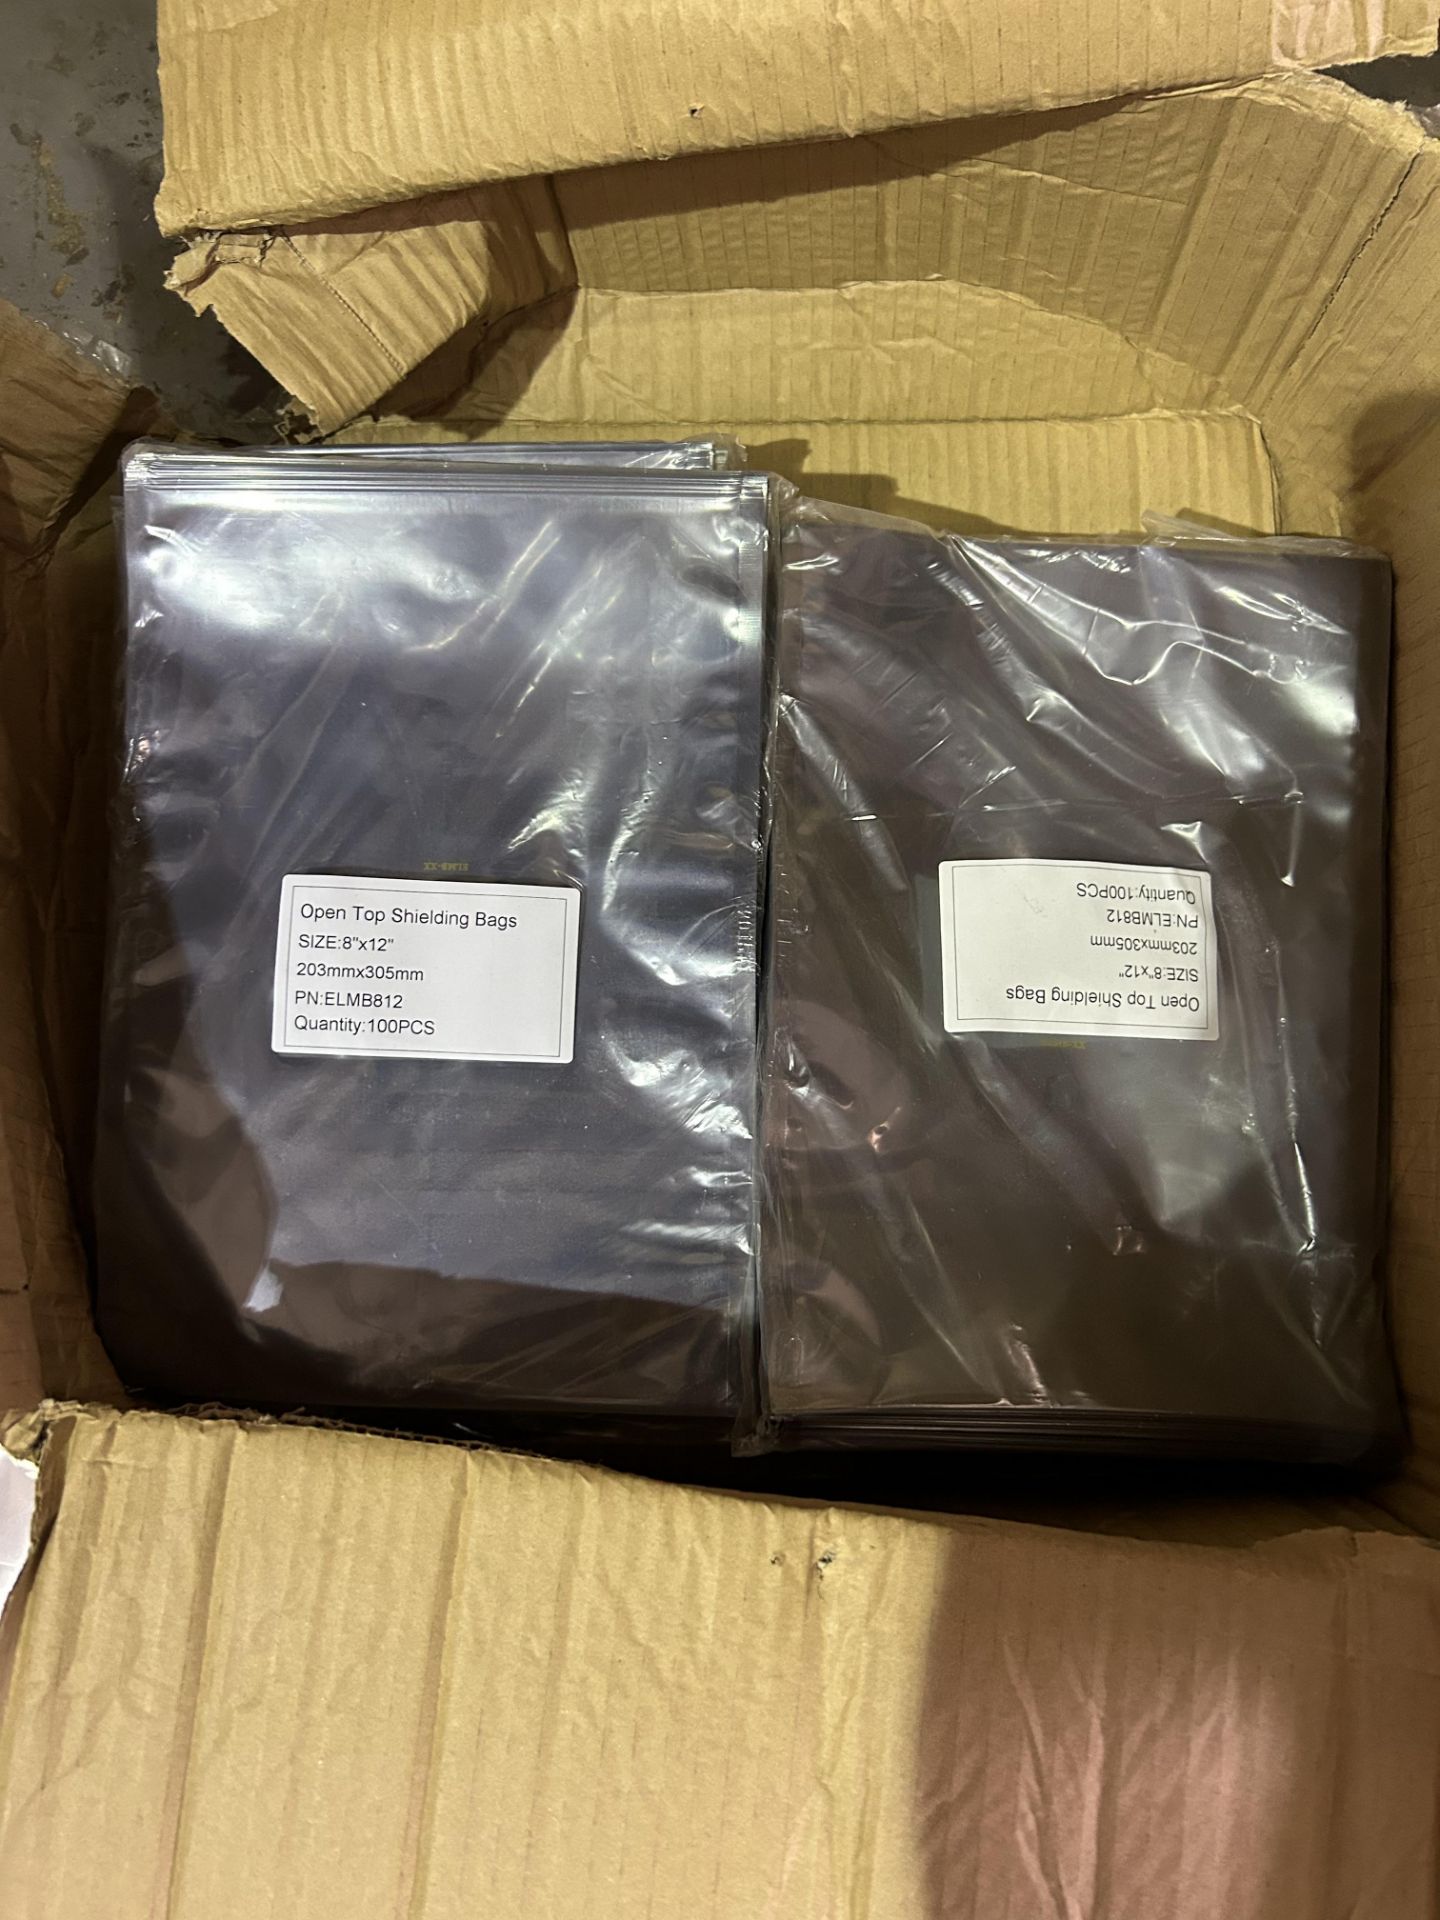 800x OPEN TOP SHIELDING PACKAGING BAGS SIZE 8x12" (8 PACKS OF 100)